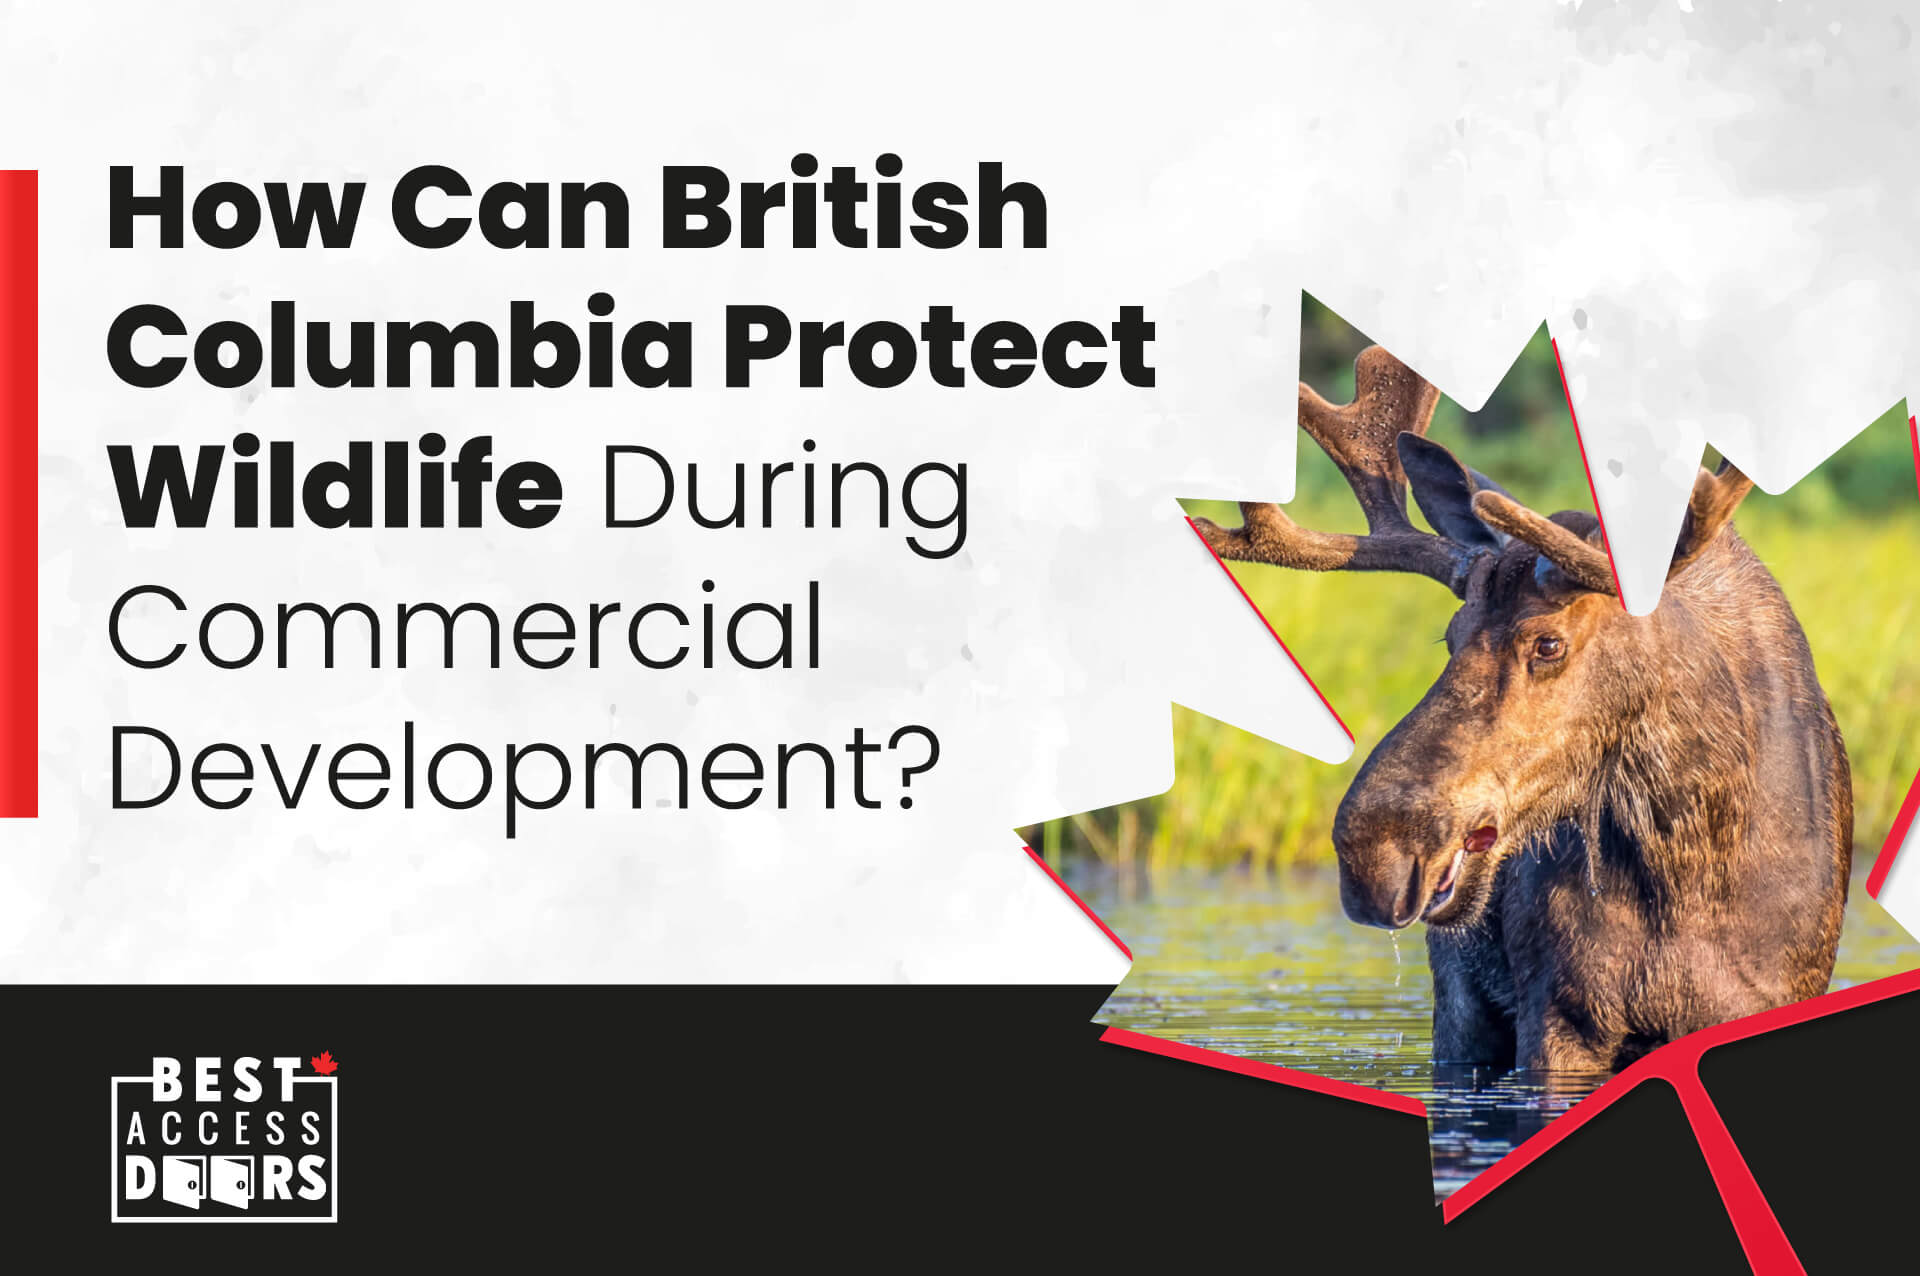 How Can British Columbia Protect Wildlife During Commercial Development?